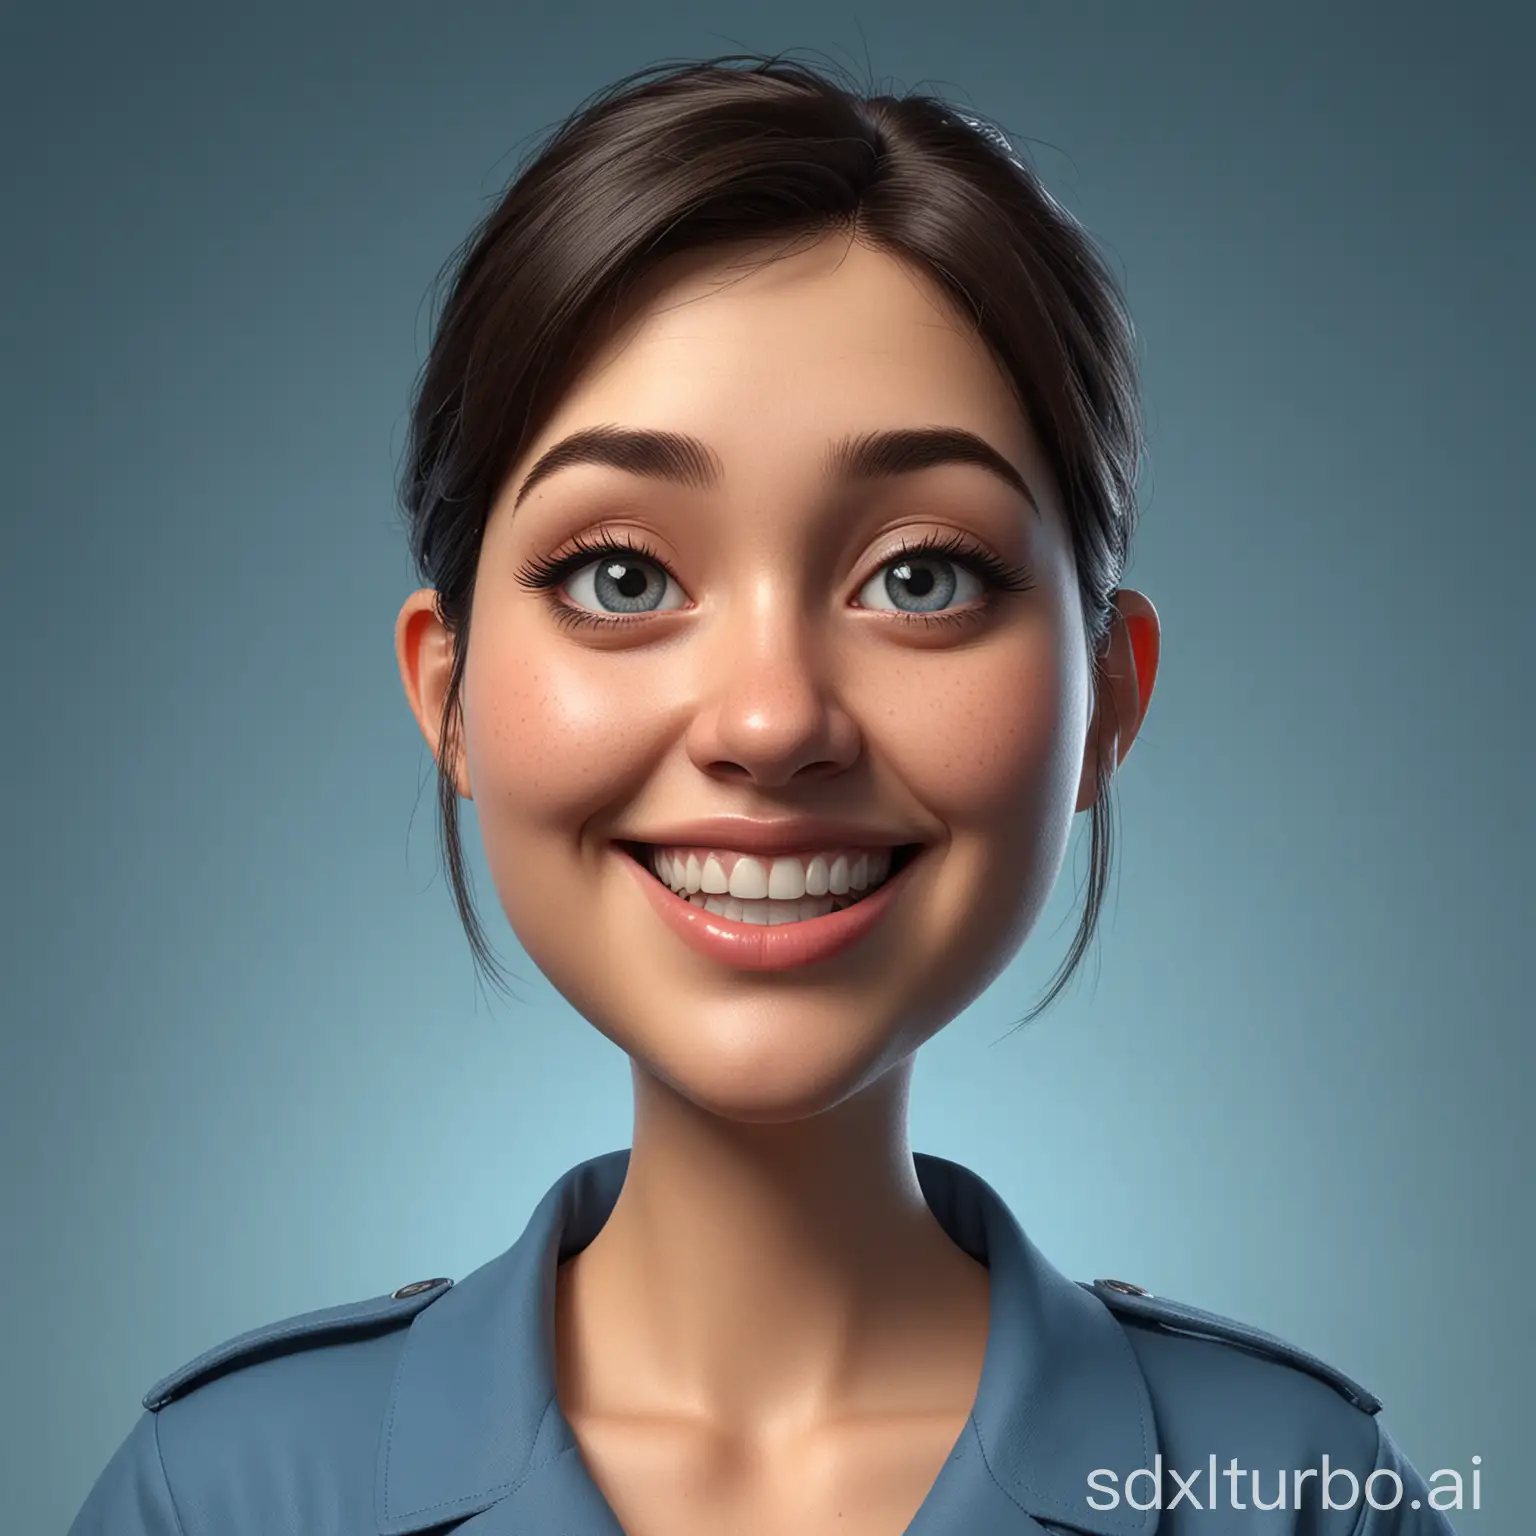 Create a Realistic cartoon style 3D caricature of a full body with a large head. Fat body, 23 year old woman. Neck-length short hair, chubby oval face, thin eyebrows, narrow eyes, big flat nose, smile with mouth wide open showing upper and lower teeth. Wearing a blue uniform. Face angle 2/3, facing right. Use soft photography lighting, uhd, hd, 20k. Hyperrealistic, detailed, color depth, dramatic, side light, blue gradient colorful background.